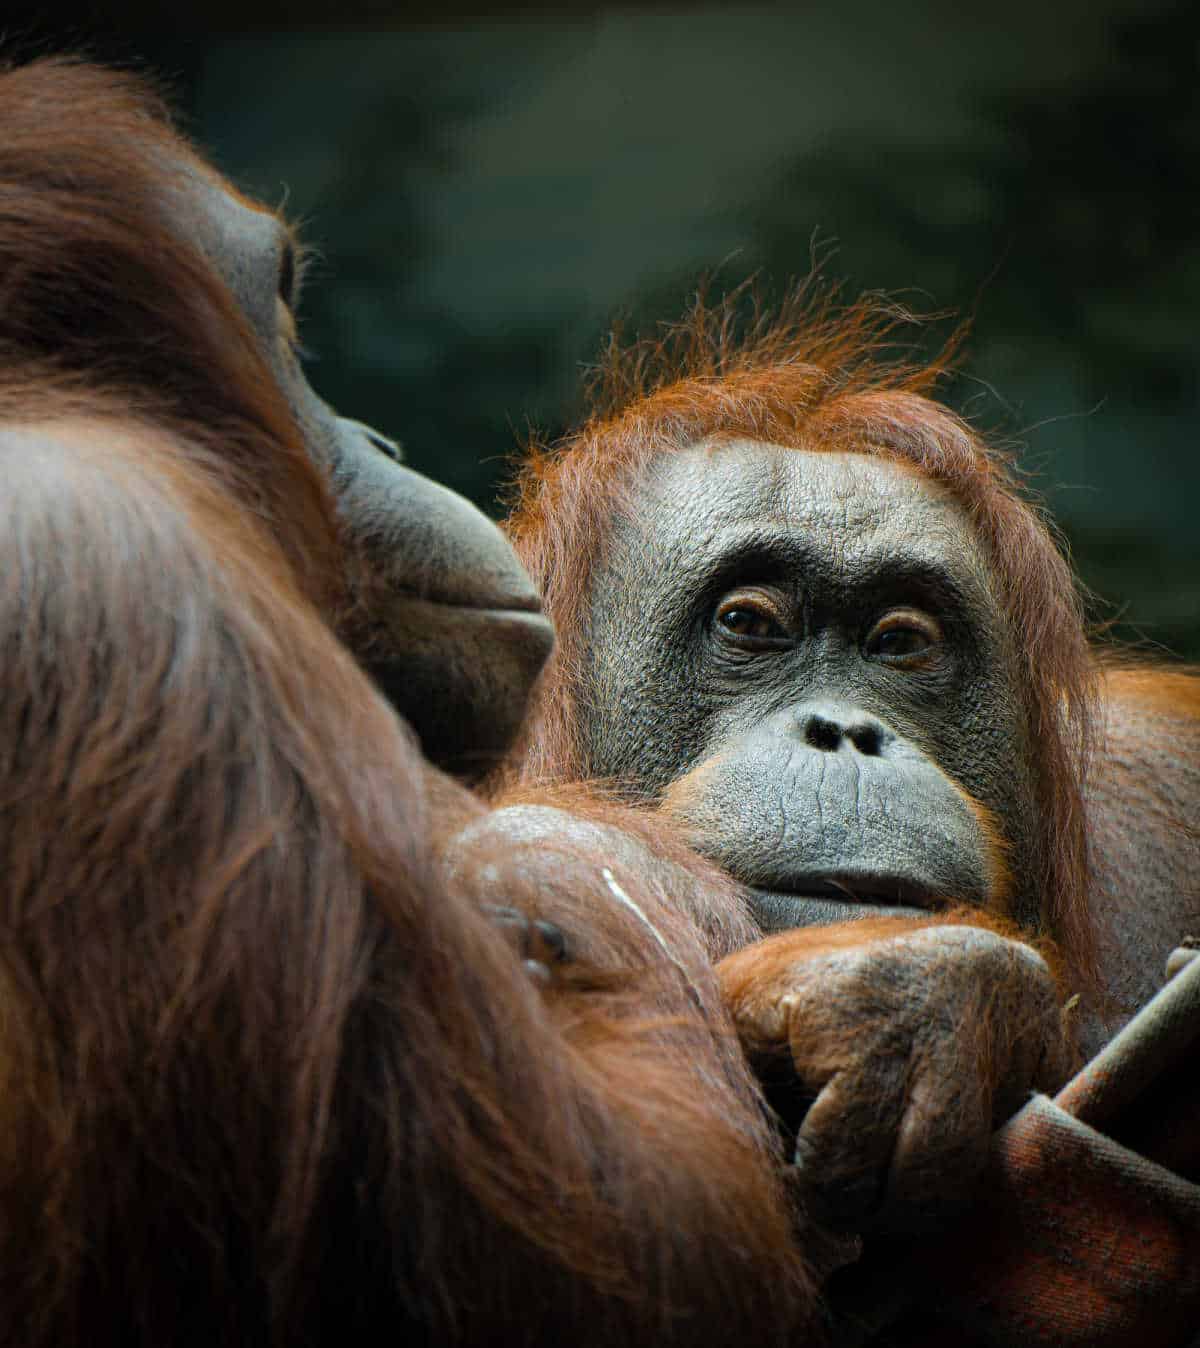 Two orangutans sitting beside each other.